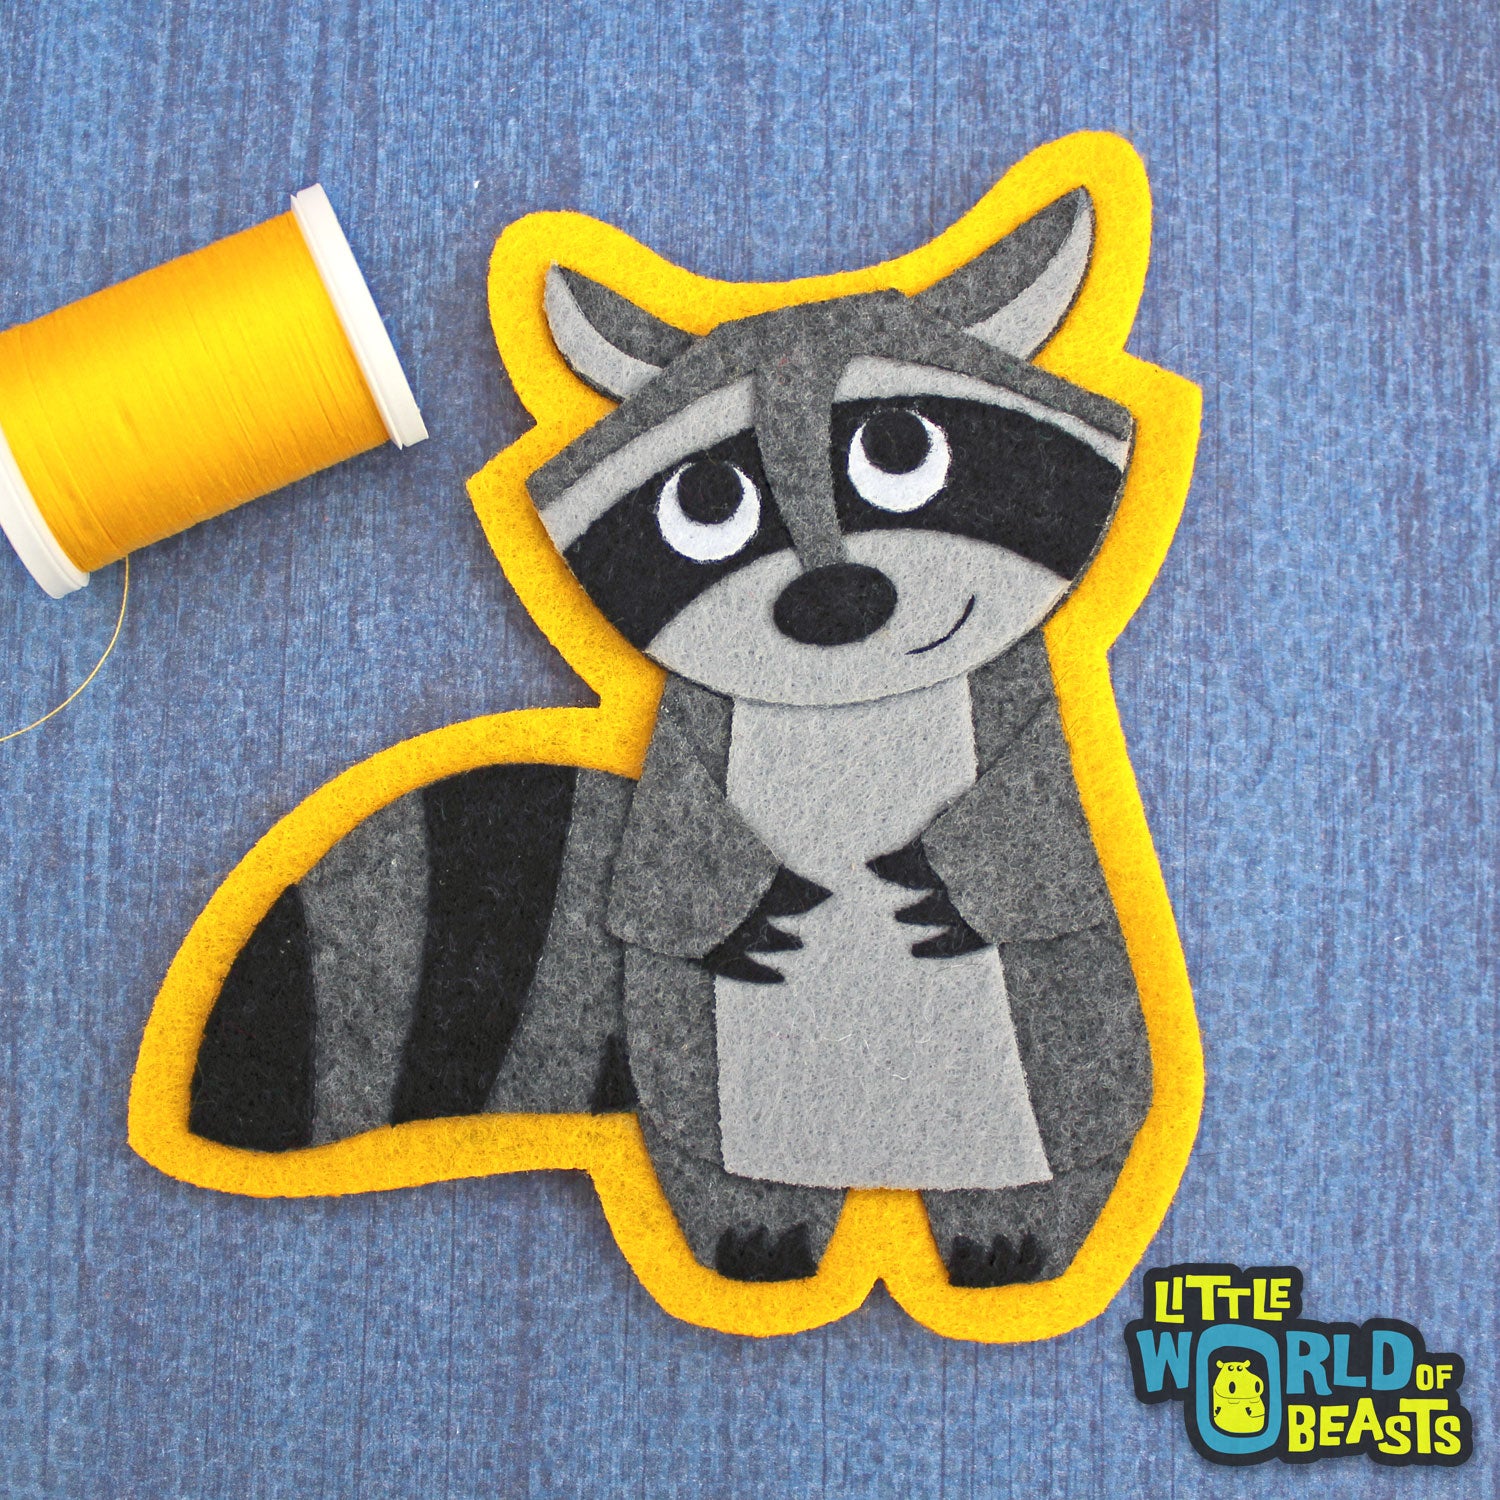 Matilda the Raccoon Patch - Iron On or Sew On Felt Applique - Little World of Beasts